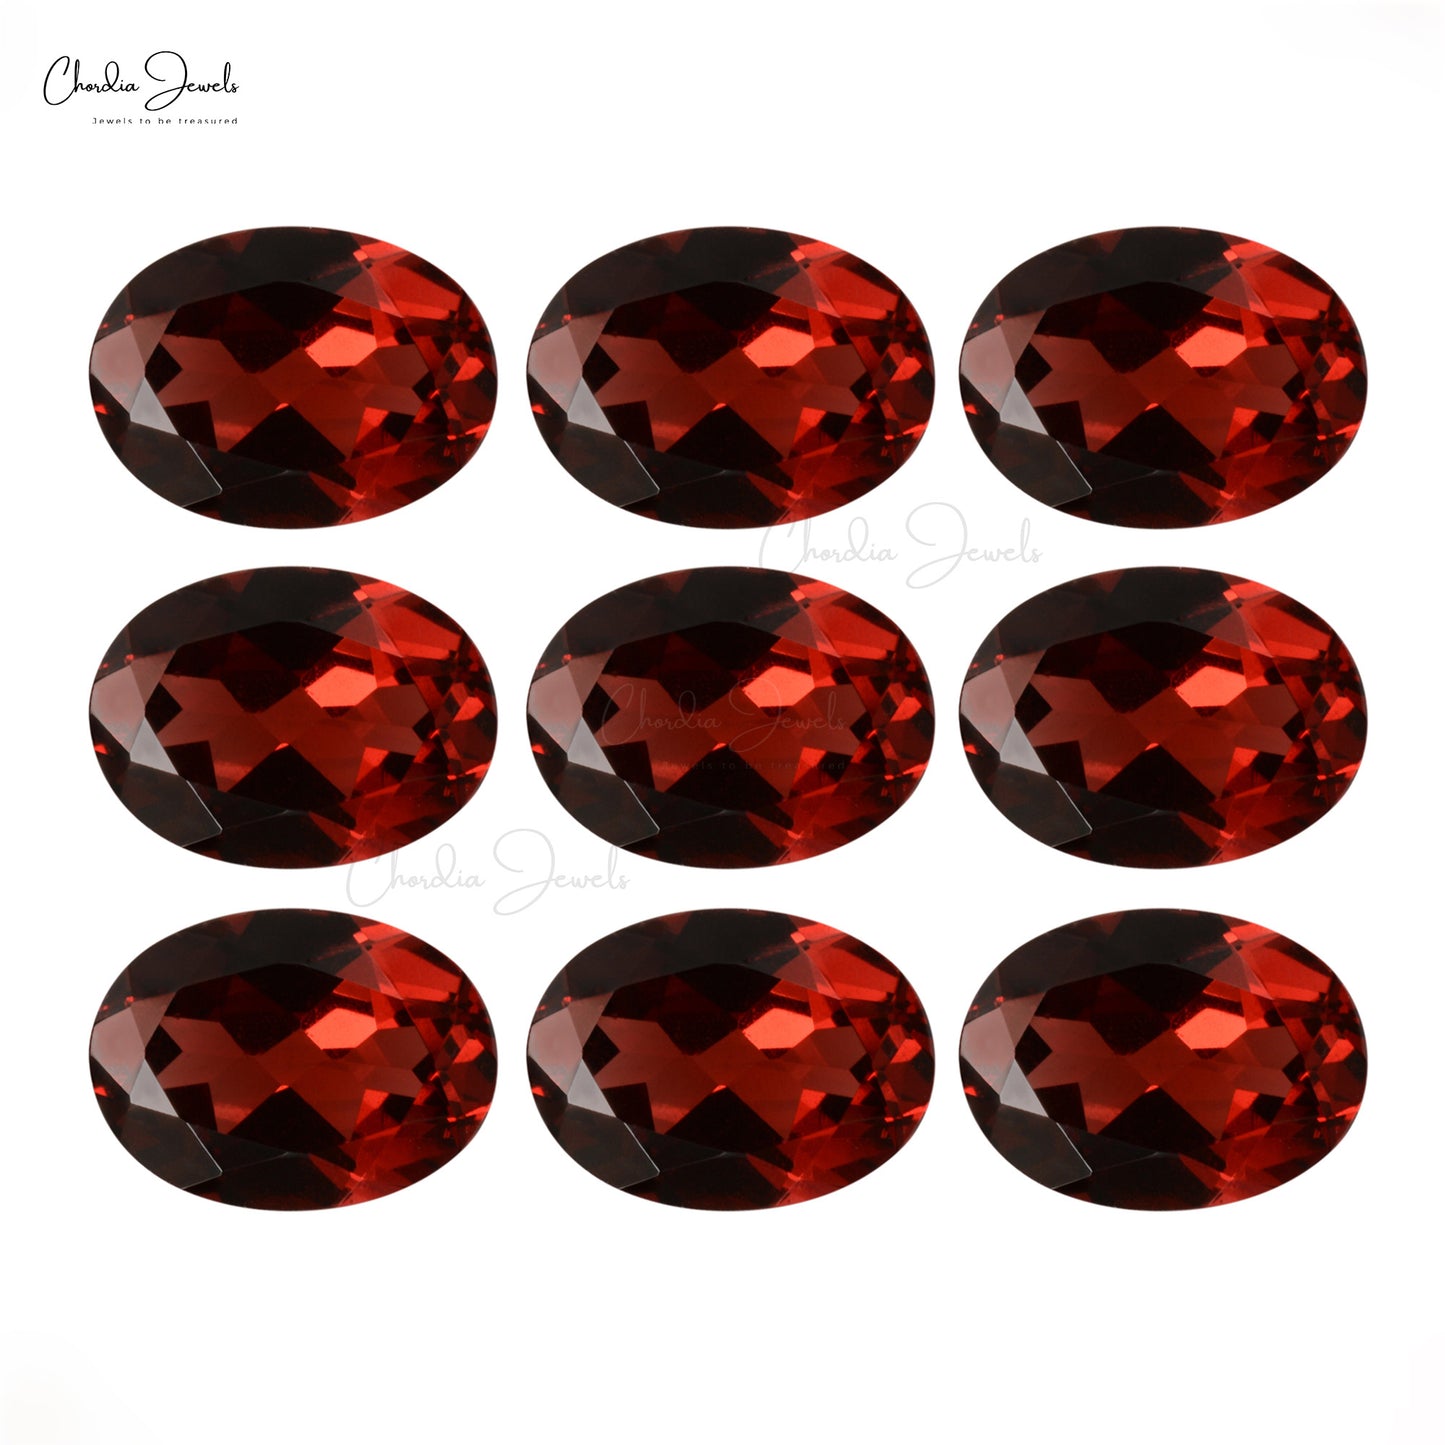 8x6 mm AAA Quality Red Garnet Oval Faceted Fine Gemstone Bulk Price, 1 Piece